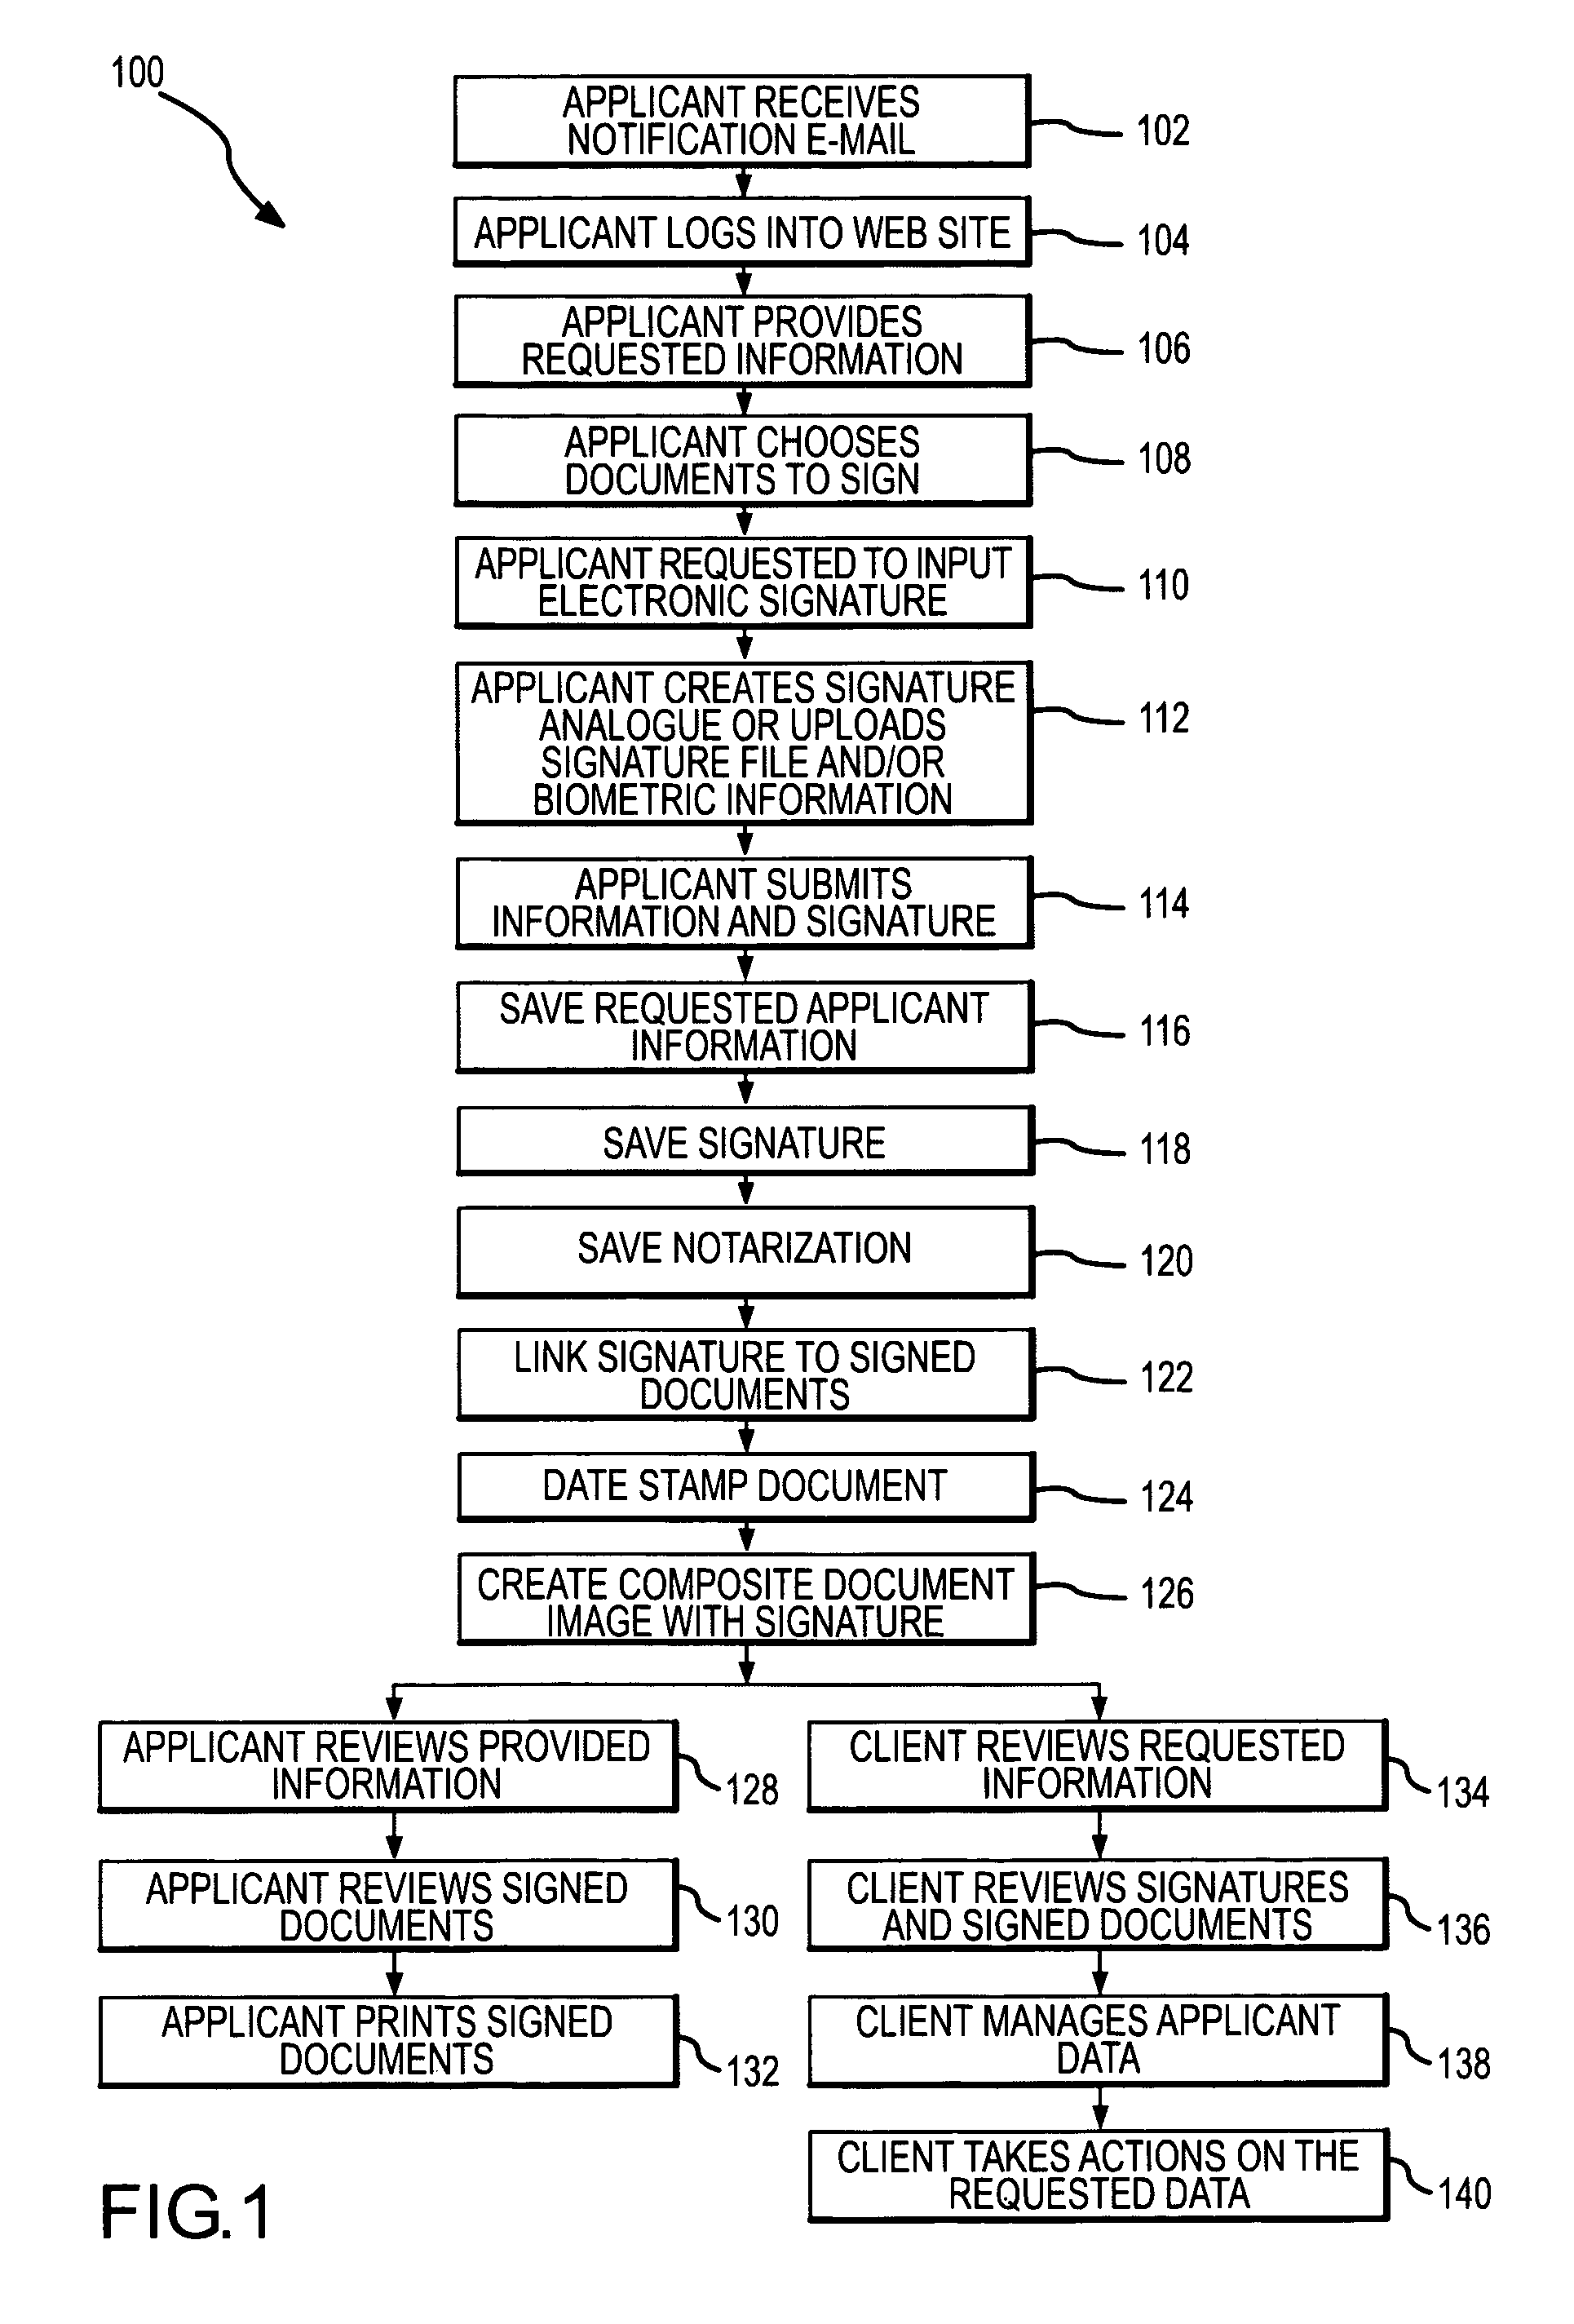 System and method for capturing and applying a legal signature to documents over a network